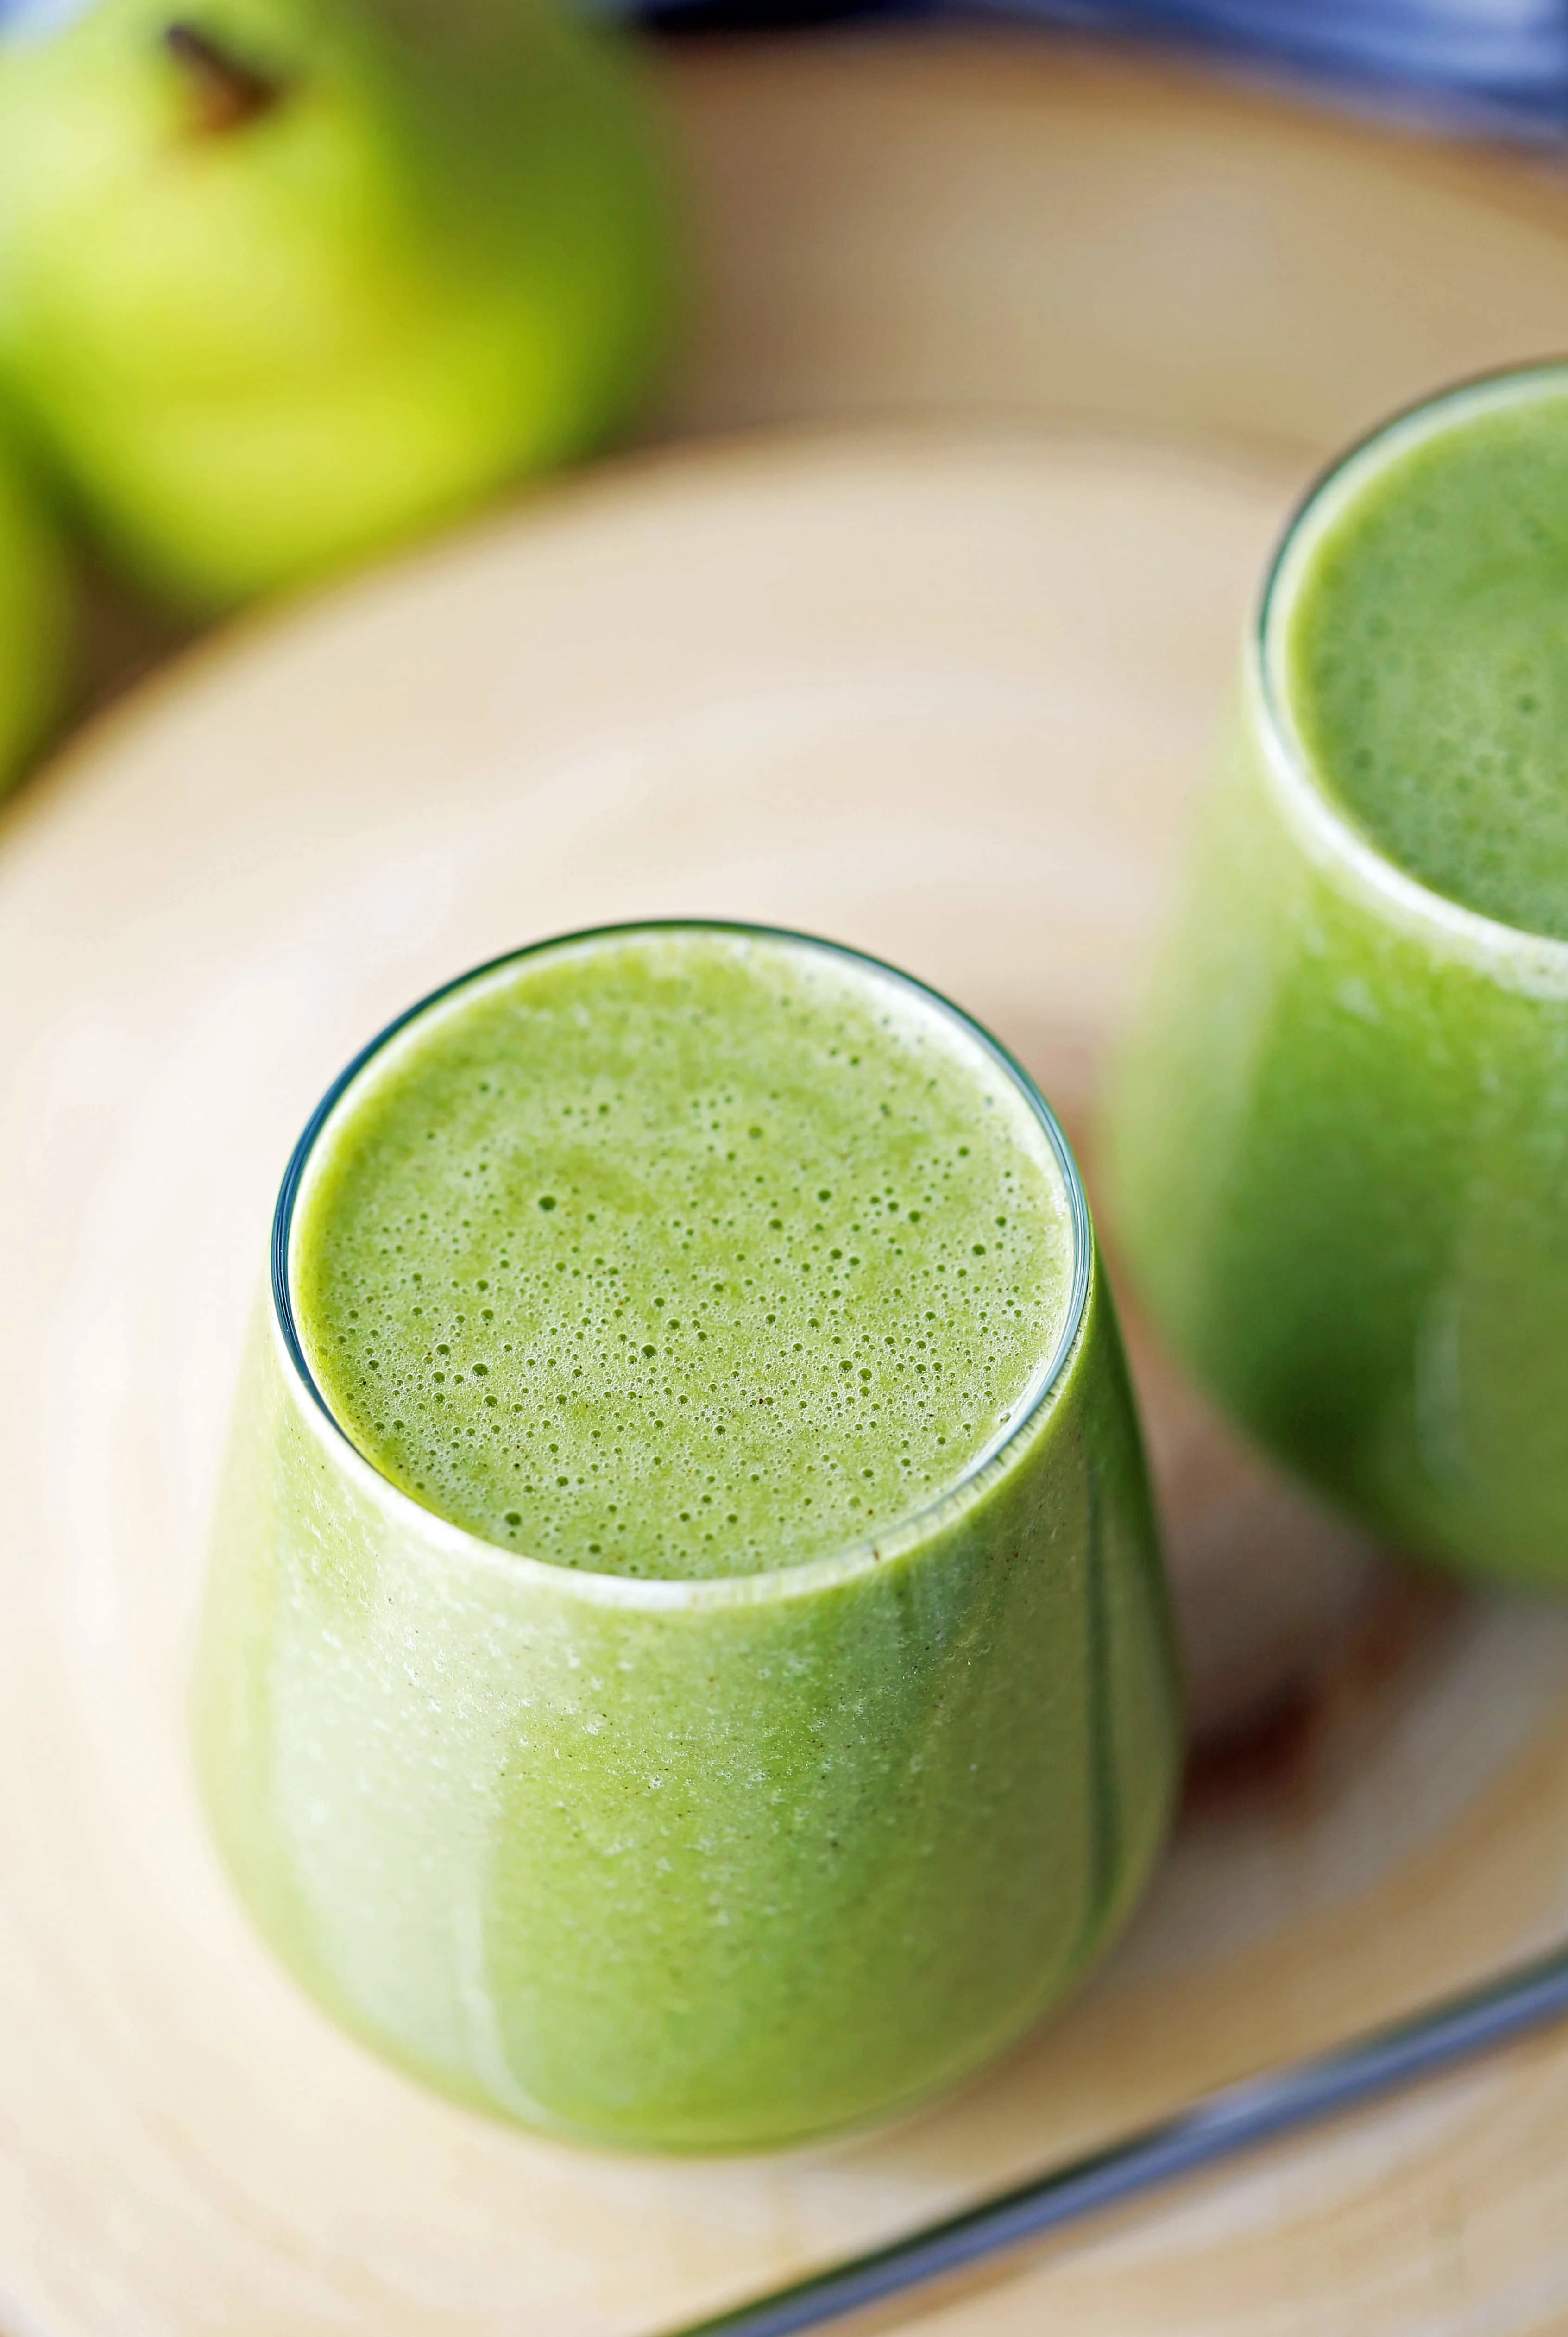 A close-up top view of a full glass of green smoothie made with pears, spinach, ground cinnamon, and almond milk.